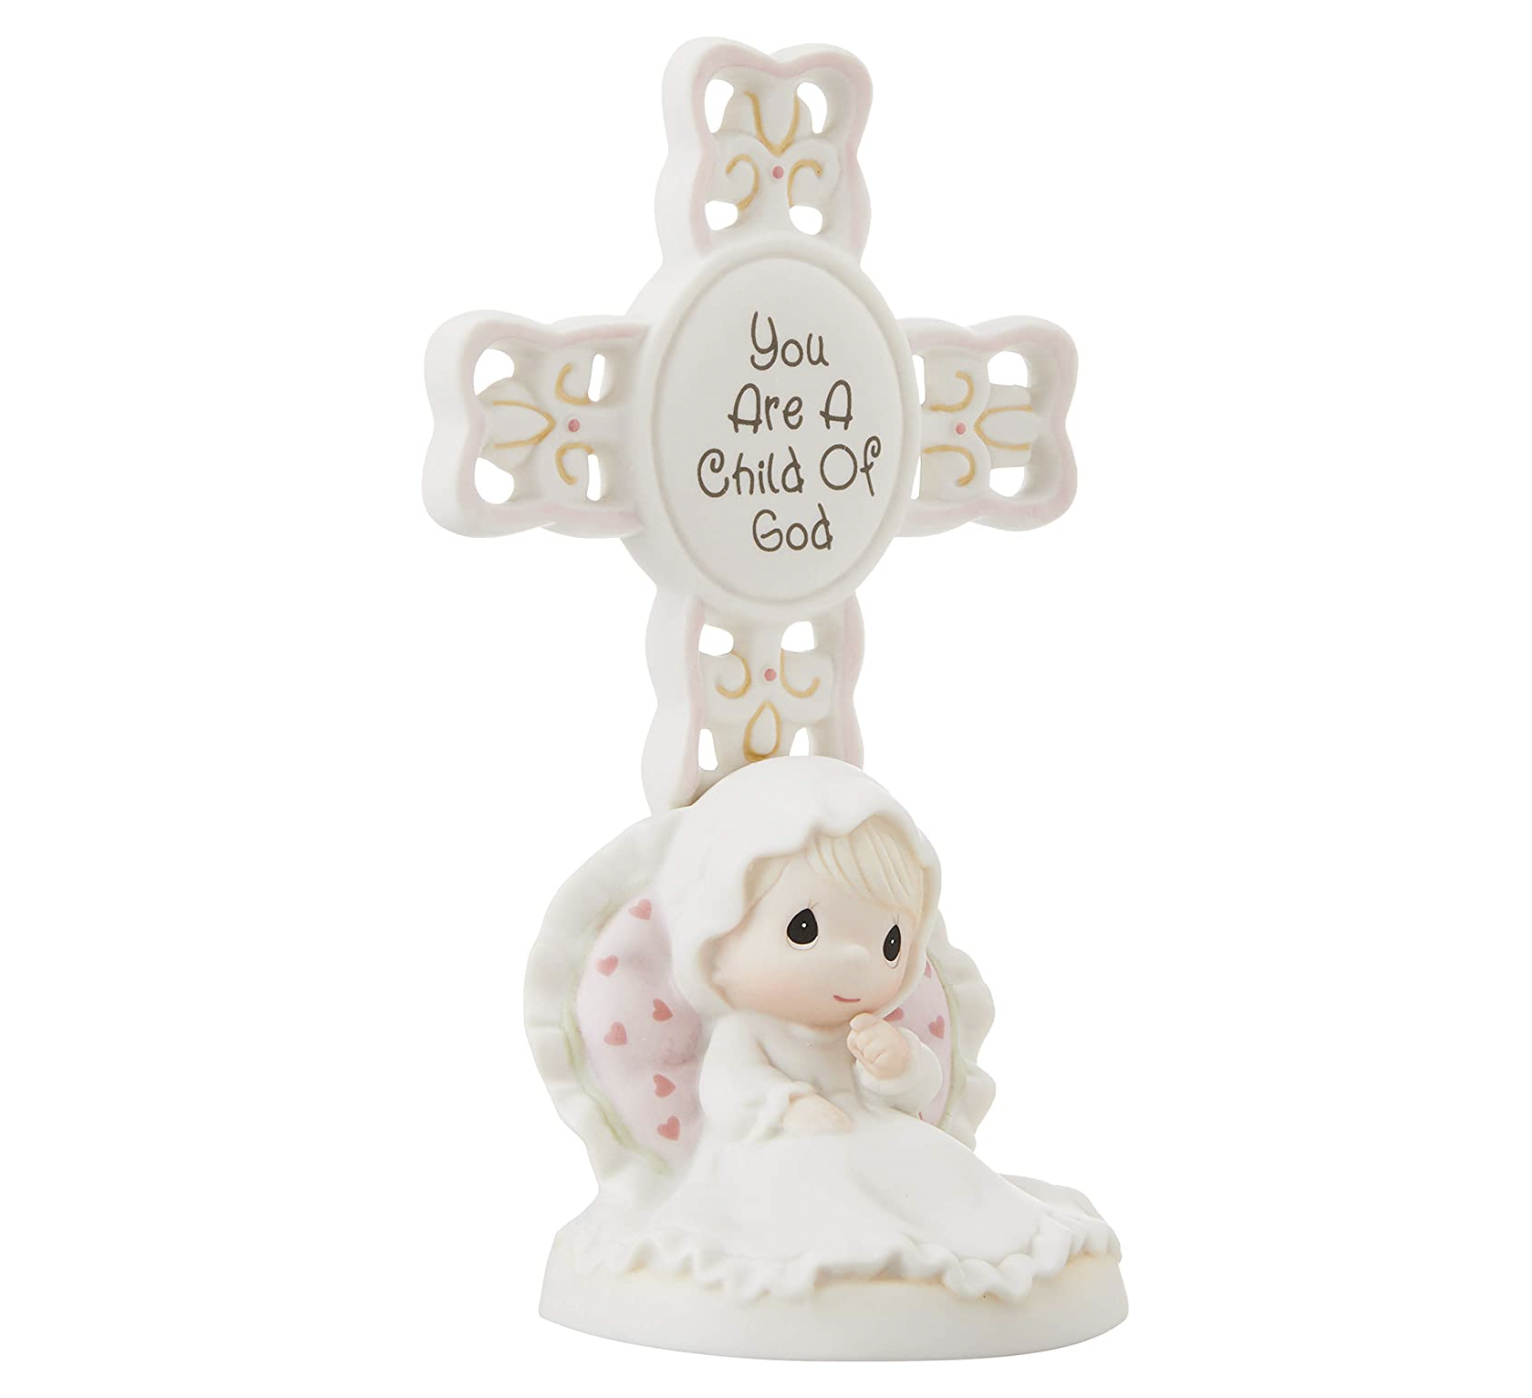 Precious Moments You Are A Child Of God, Bisque Porcelain Cross